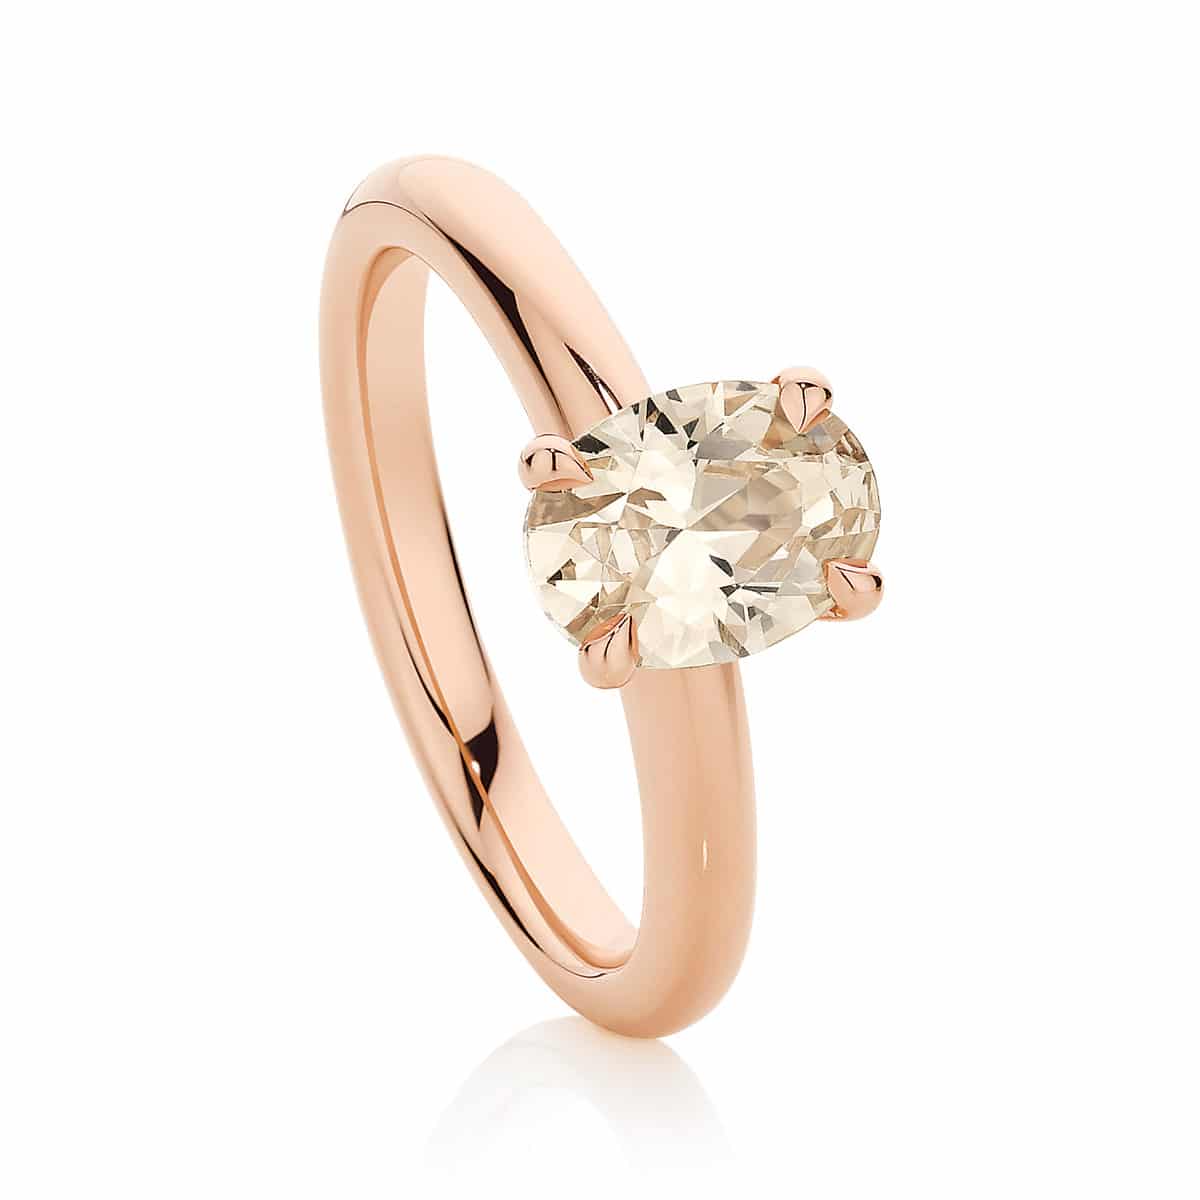 Champagne Diamond Solitaire Dress Ring Rose Gold | Osirus Champagne